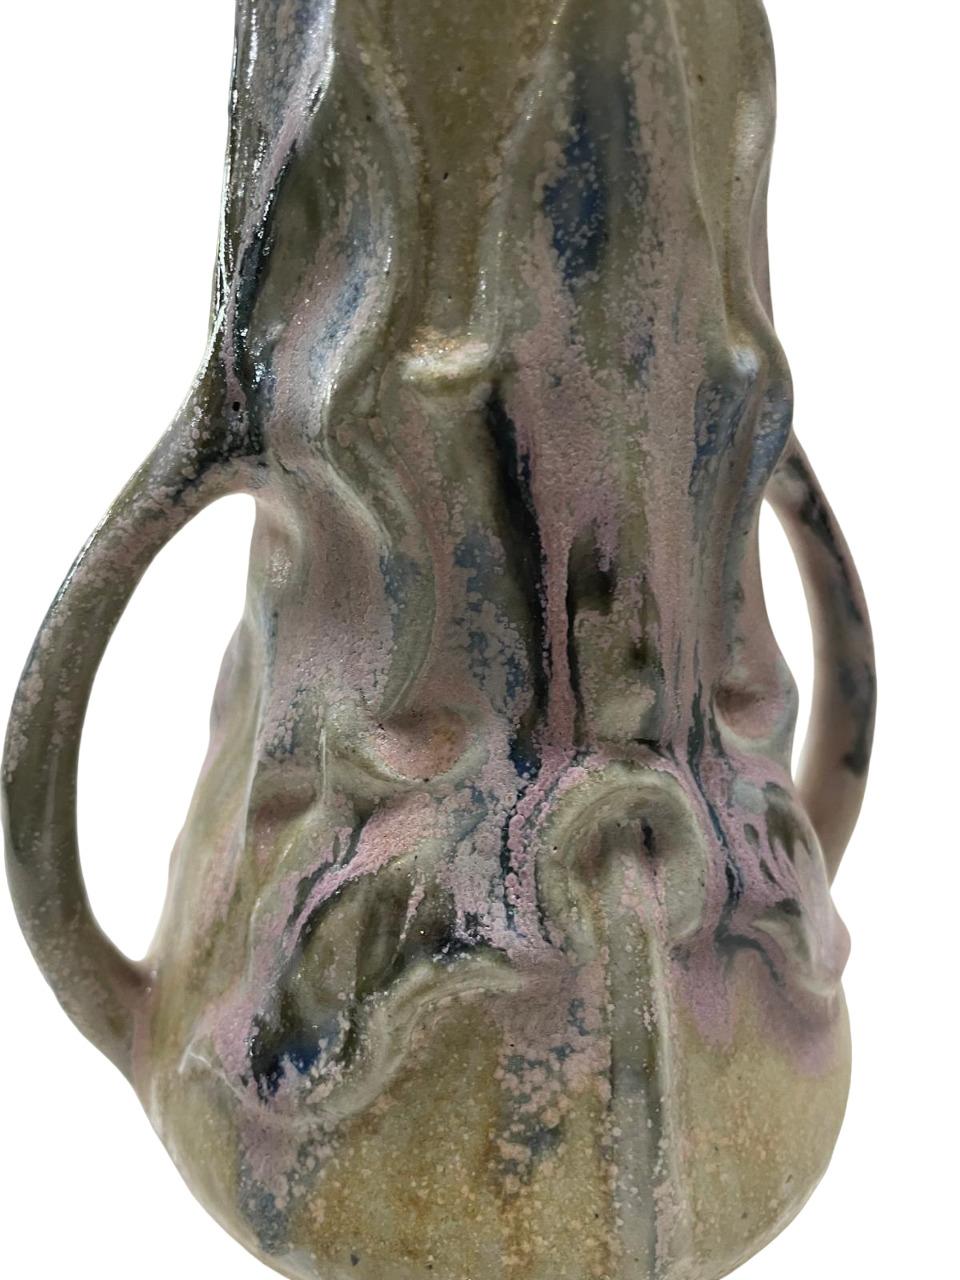 ART NOUVEAU two-handled GREBER Vase, with some pink flashes, refined ceramic For Sale 8